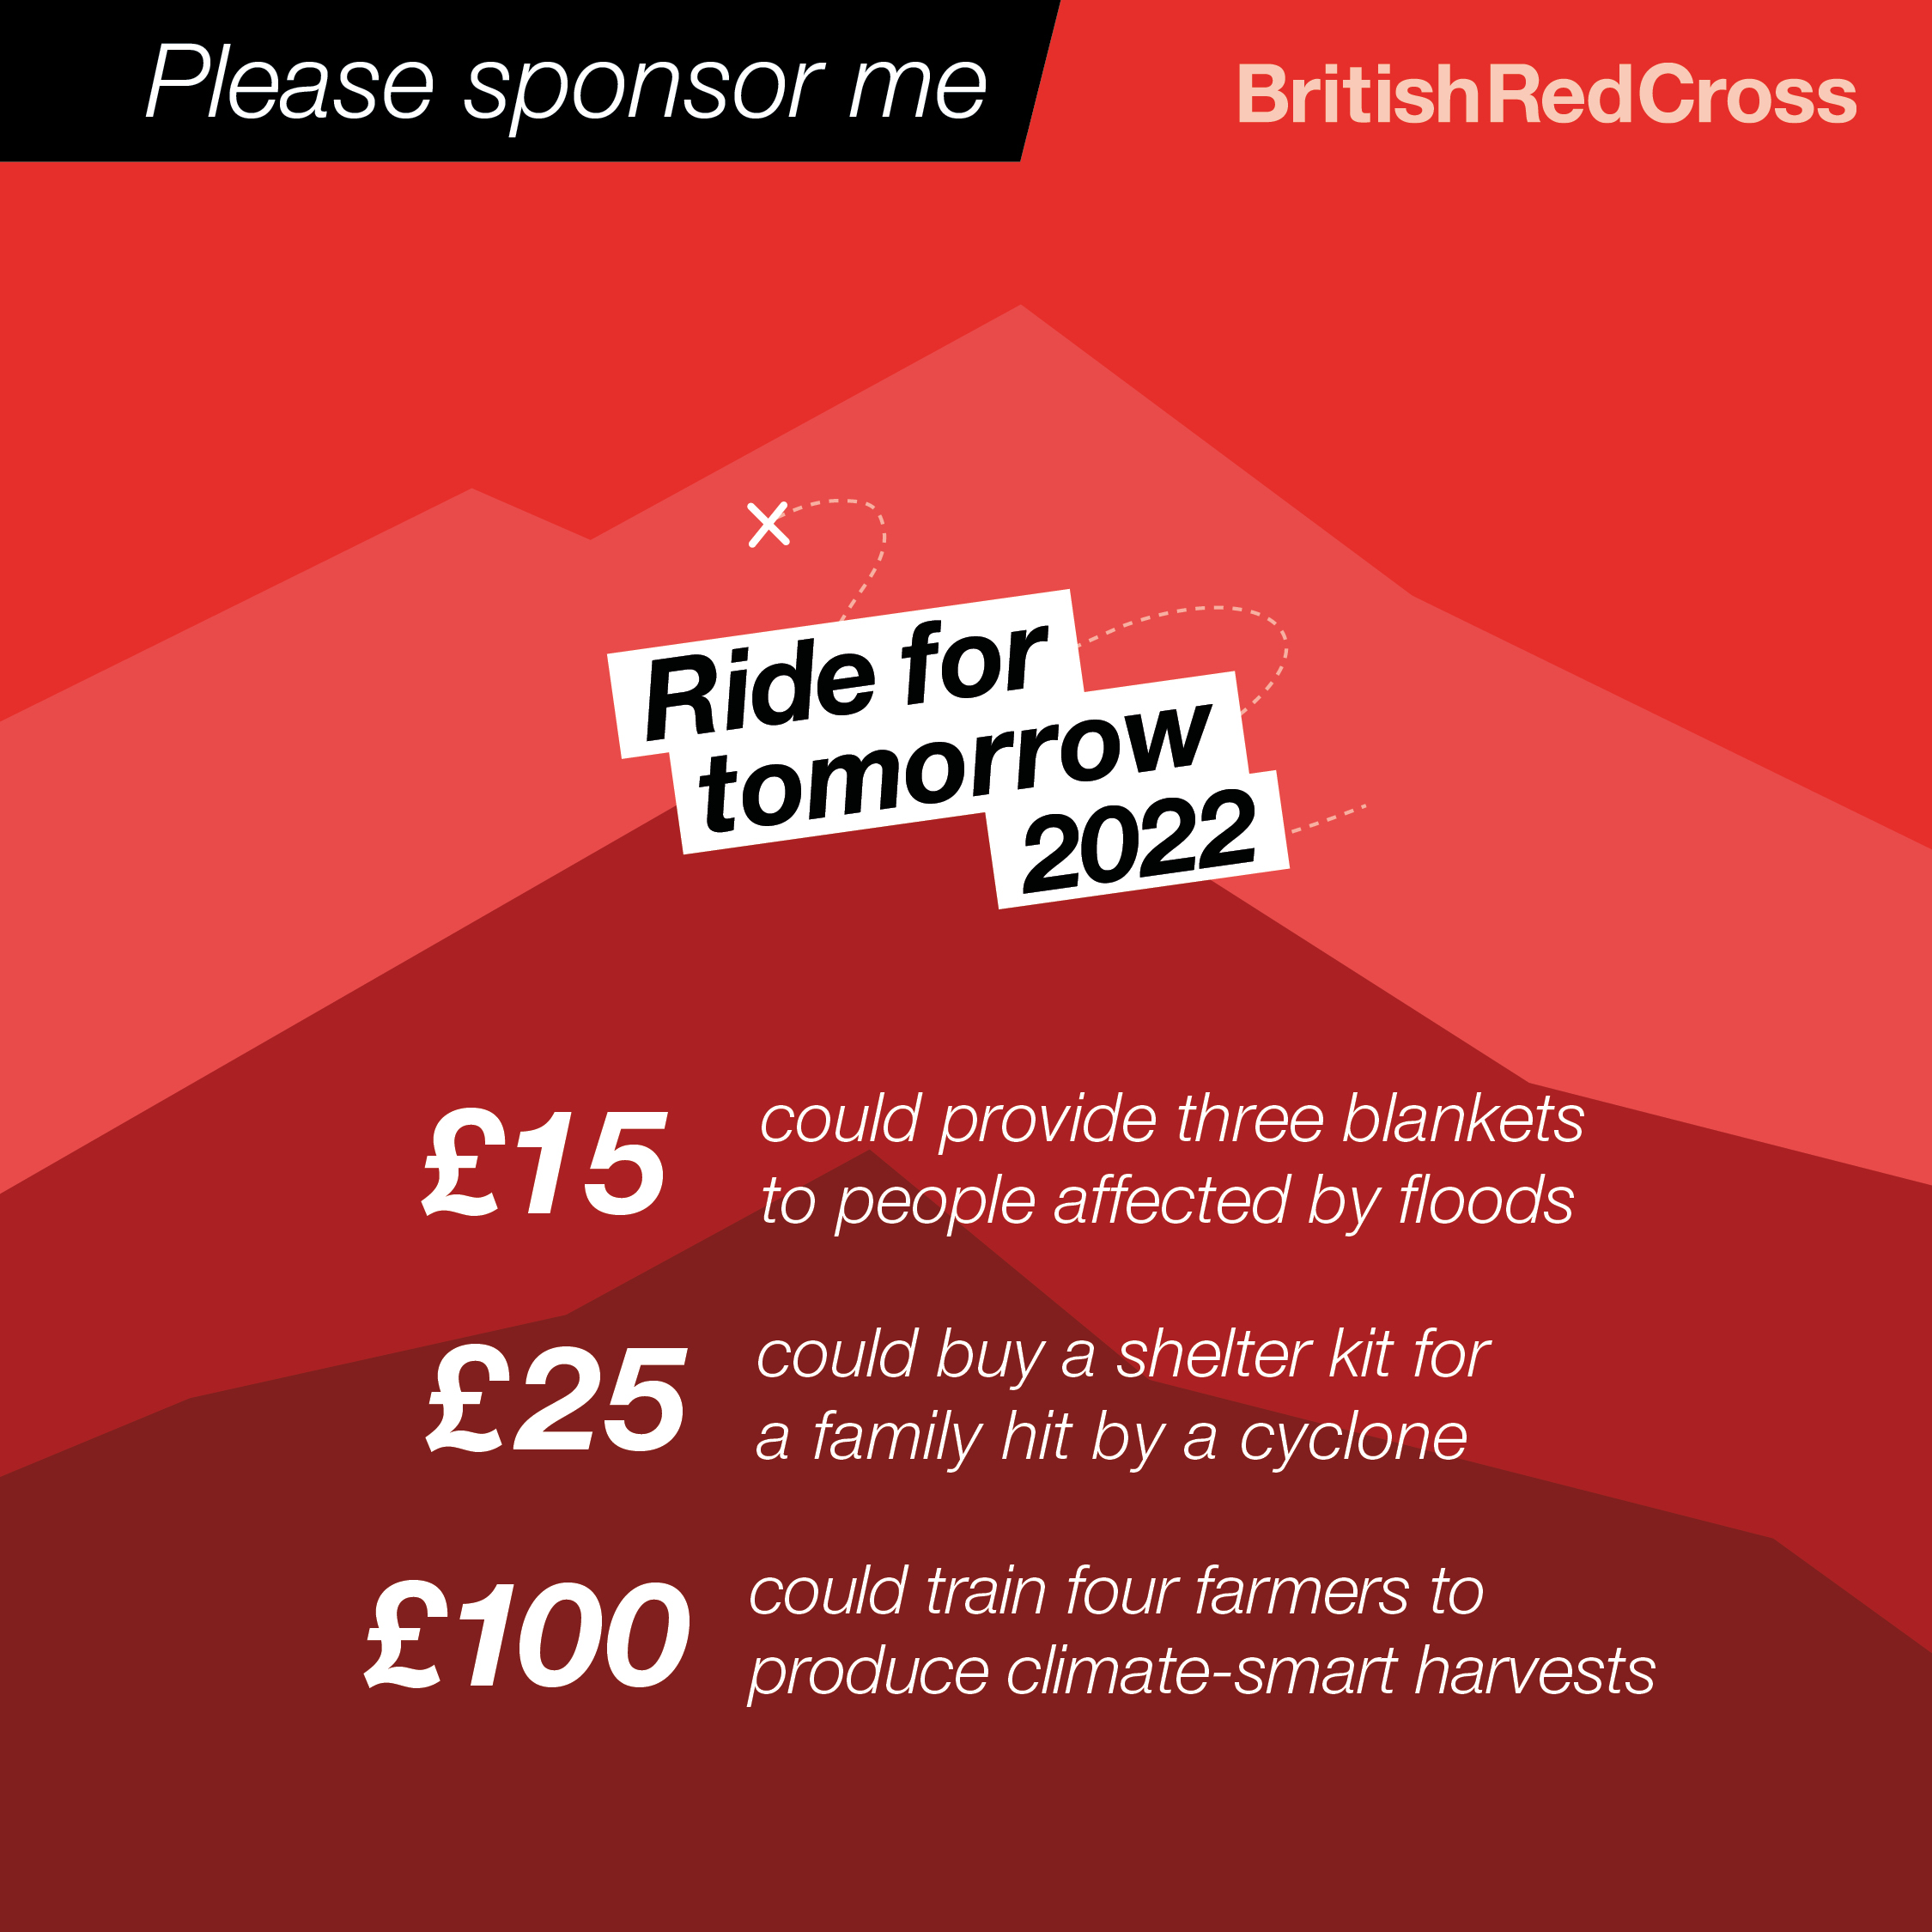 Please sponsor me text and a list of what can be bought for £15, £25 and £100 on a red background with 3 mountain outlines.